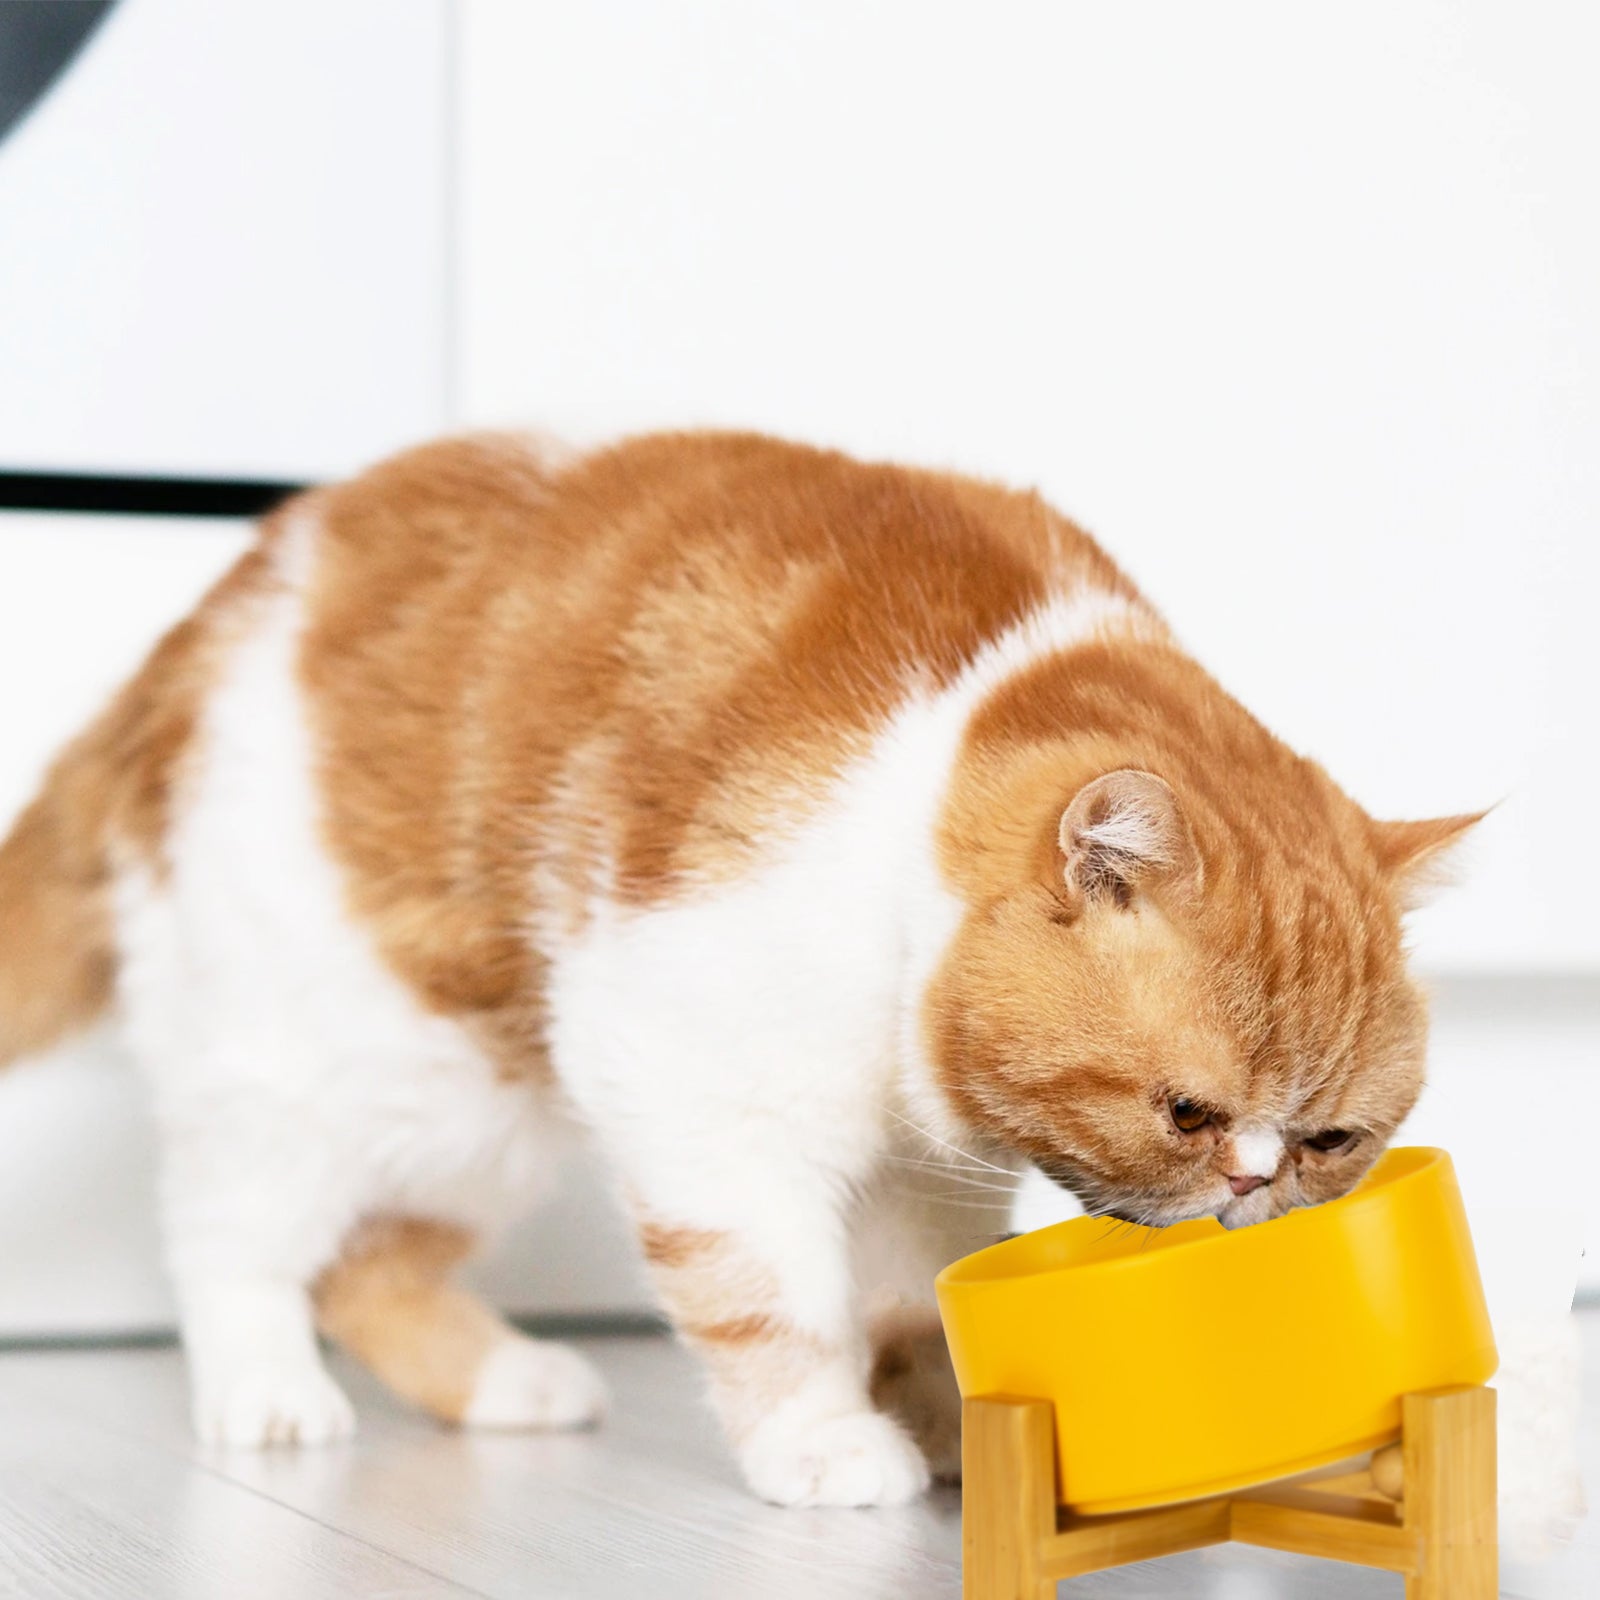 a cute cat eats in the yellow tilted pet bowl